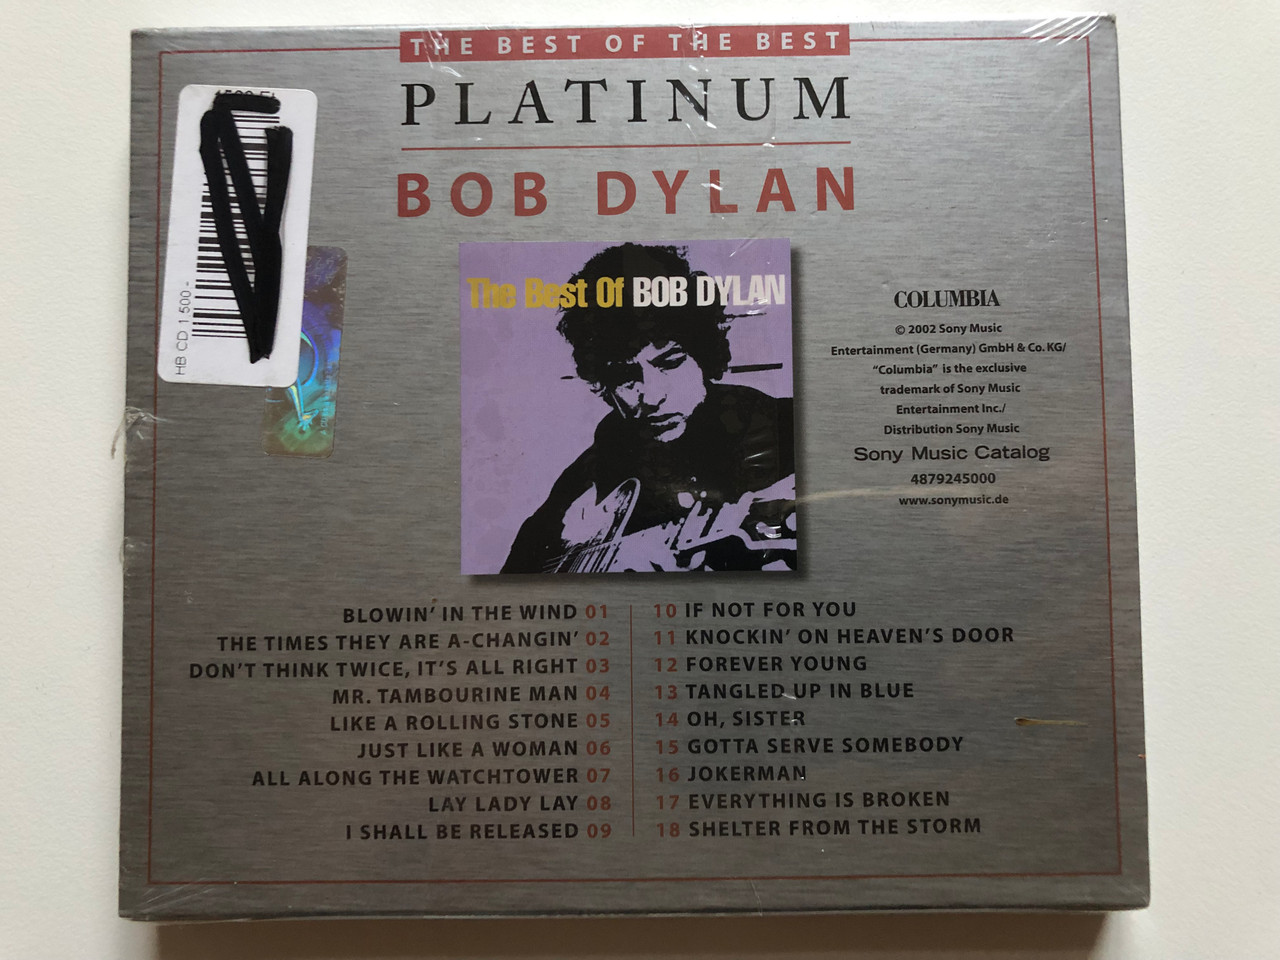 https://cdn10.bigcommerce.com/s-62bdpkt7pb/products/0/images/210519/The_Best_Of_Bob_Dylan_The_Best_Of_The_Best_-_Platinum_-_Bob_Dylan_Like_A_Rolling_Stone_Forever_Young_Blowin_In_The_Wind_Knockin_On_Heavens_Door_Lay_Lady_Lay_and_many_more_Columbia__28259.1643624099.1280.1280.JPG?c=2&_gl=1*4z4n6q*_ga*MjA2NTIxMjE2MC4xNTkwNTEyNTMy*_ga_WS2VZYPC6G*MTY0MzYxMzI3MC4yODAuMS4xNjQzNjIzNDc4LjYw